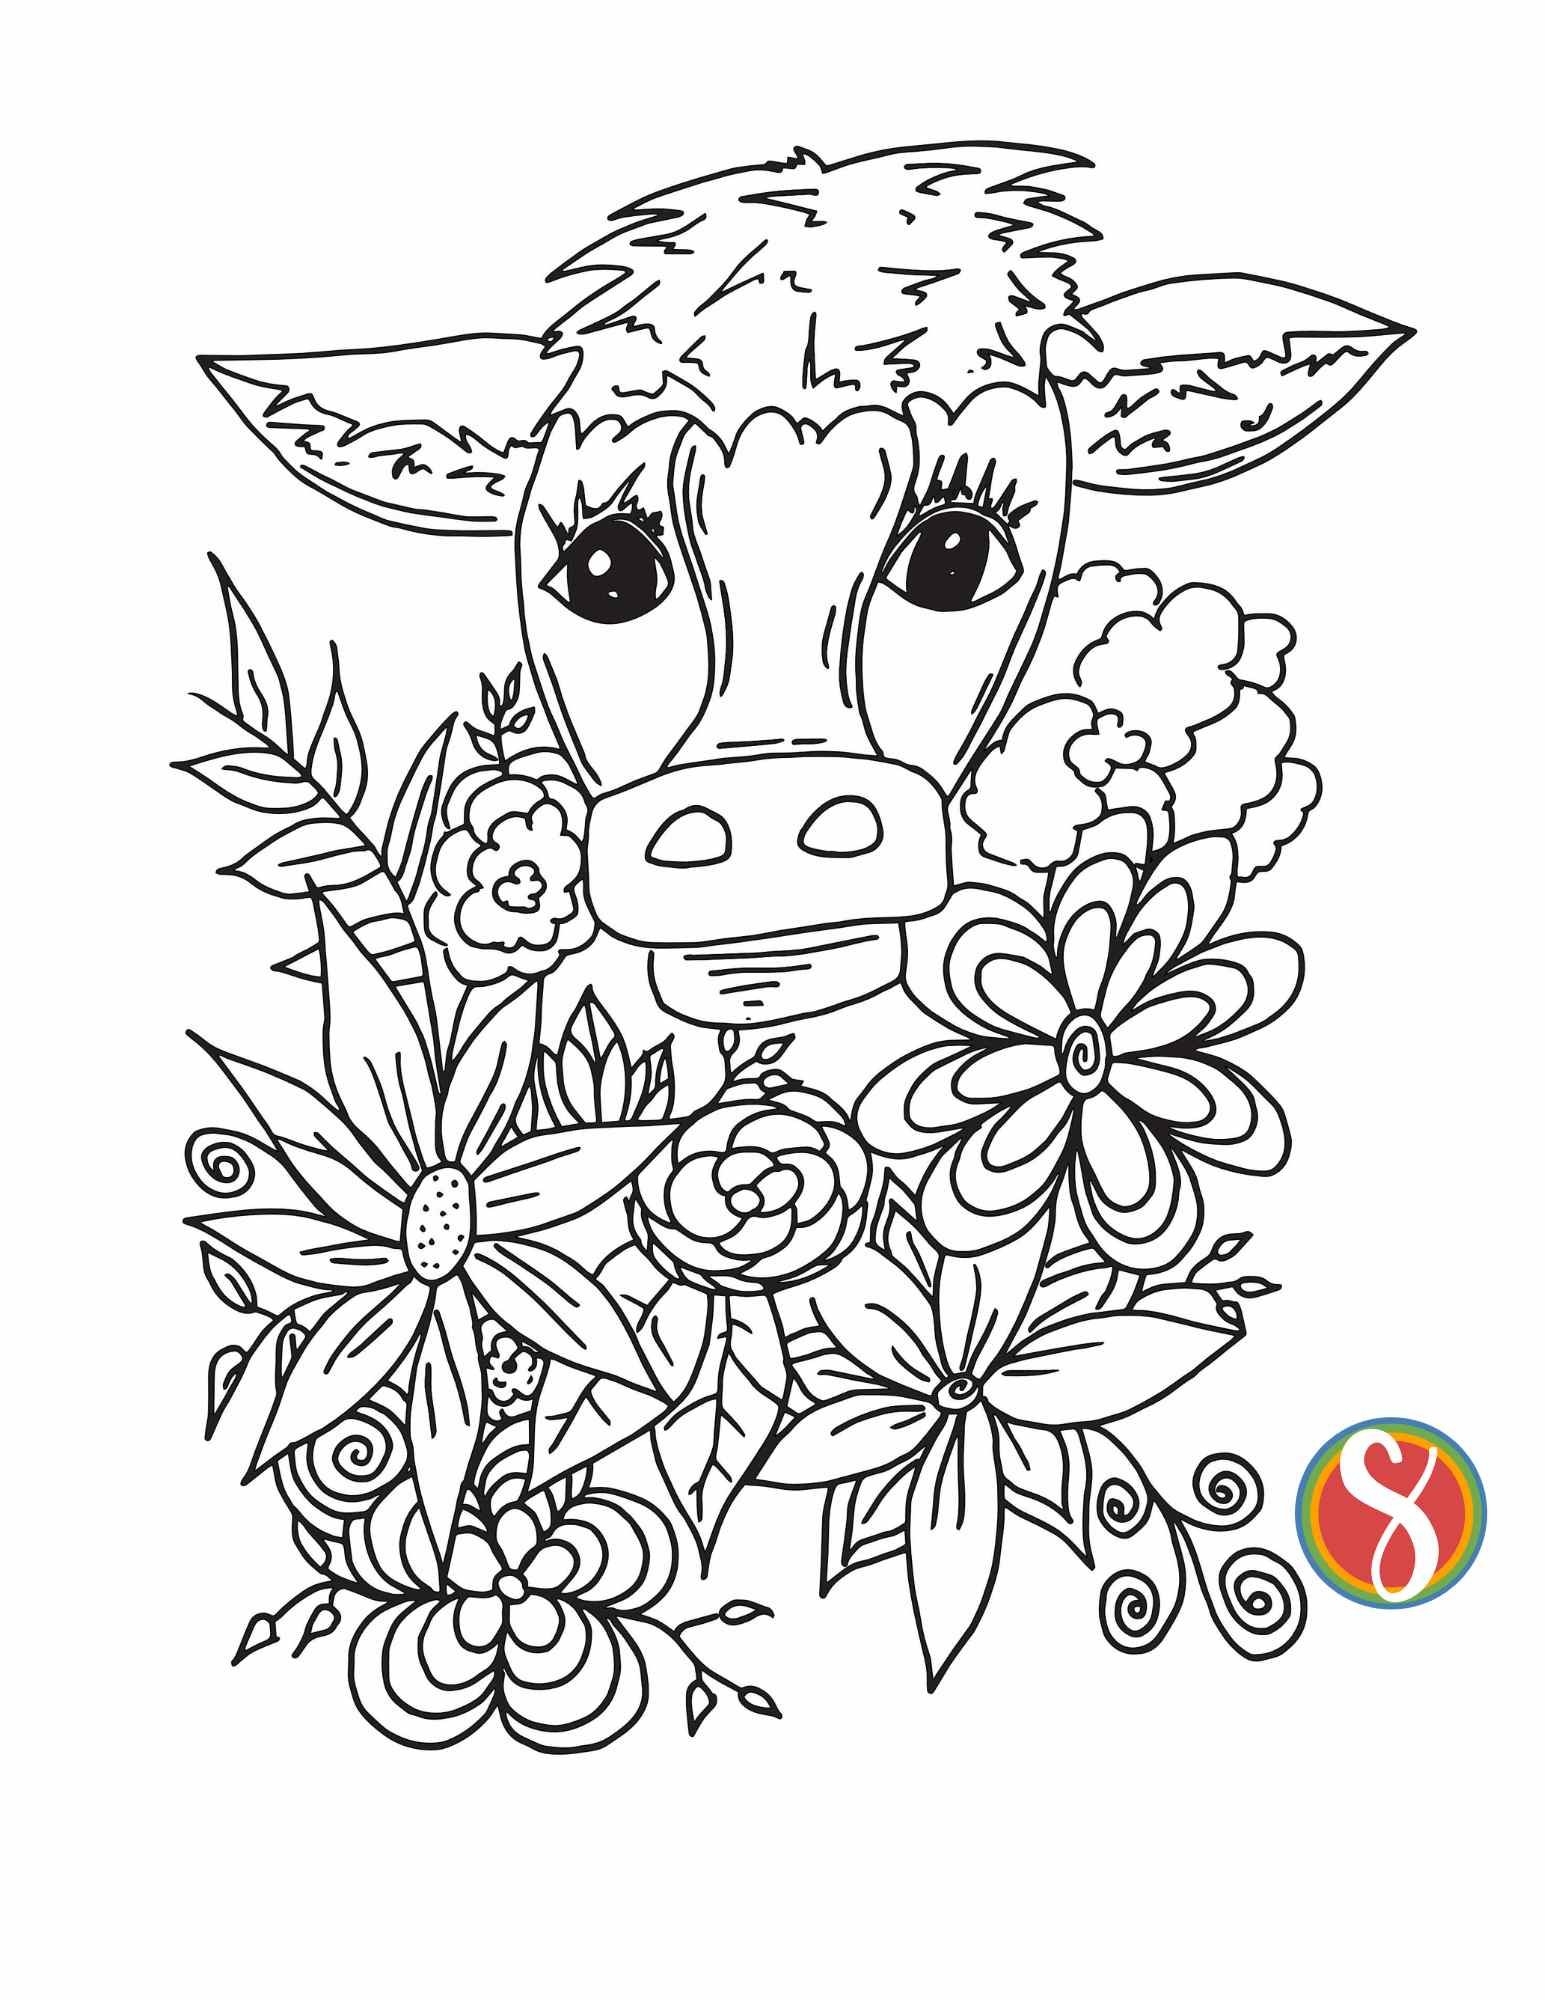 Free Cow Coloring Pages Stevie Doodles - Coloring Pages of Cows Free Printable